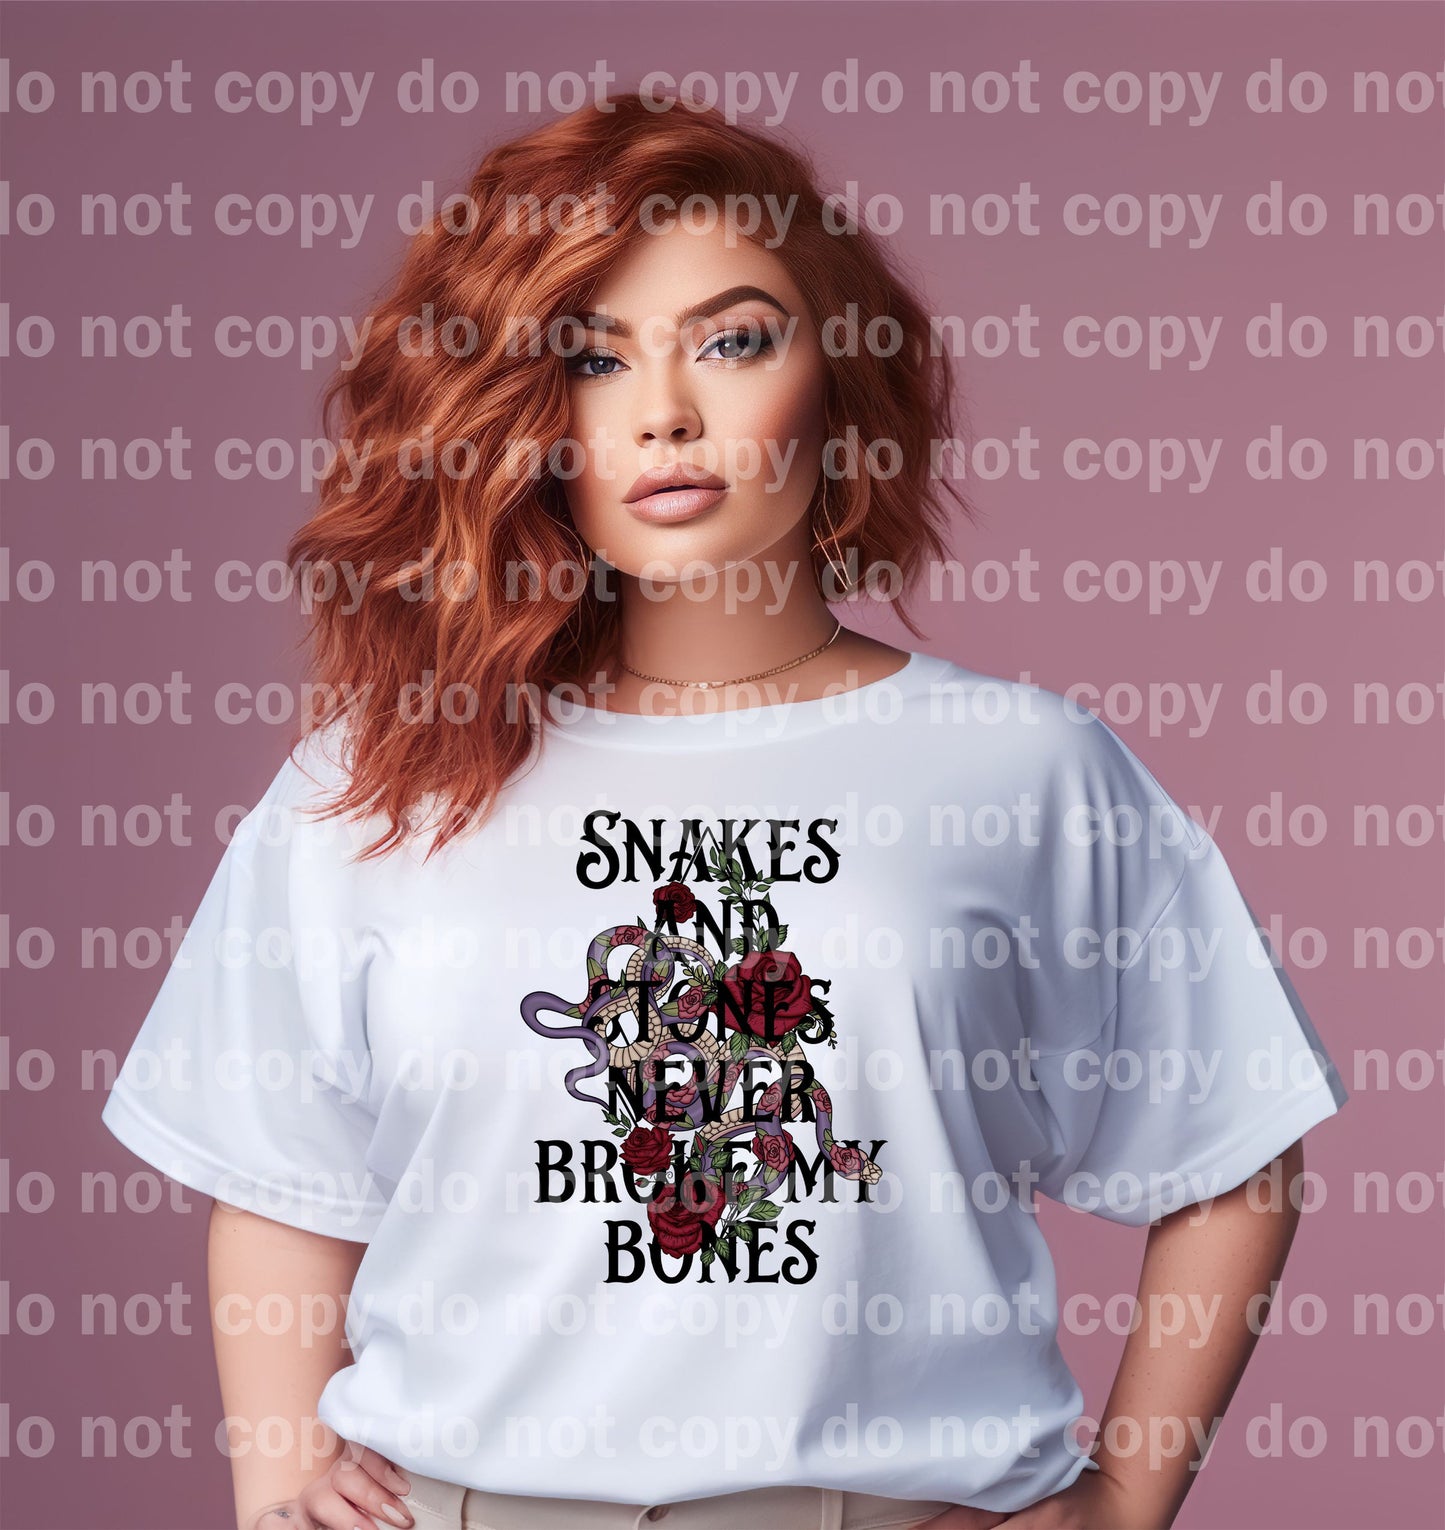 Snakes and Stones Never Broke My Bones Full Color/One Color Dream Print or Sublimation Print